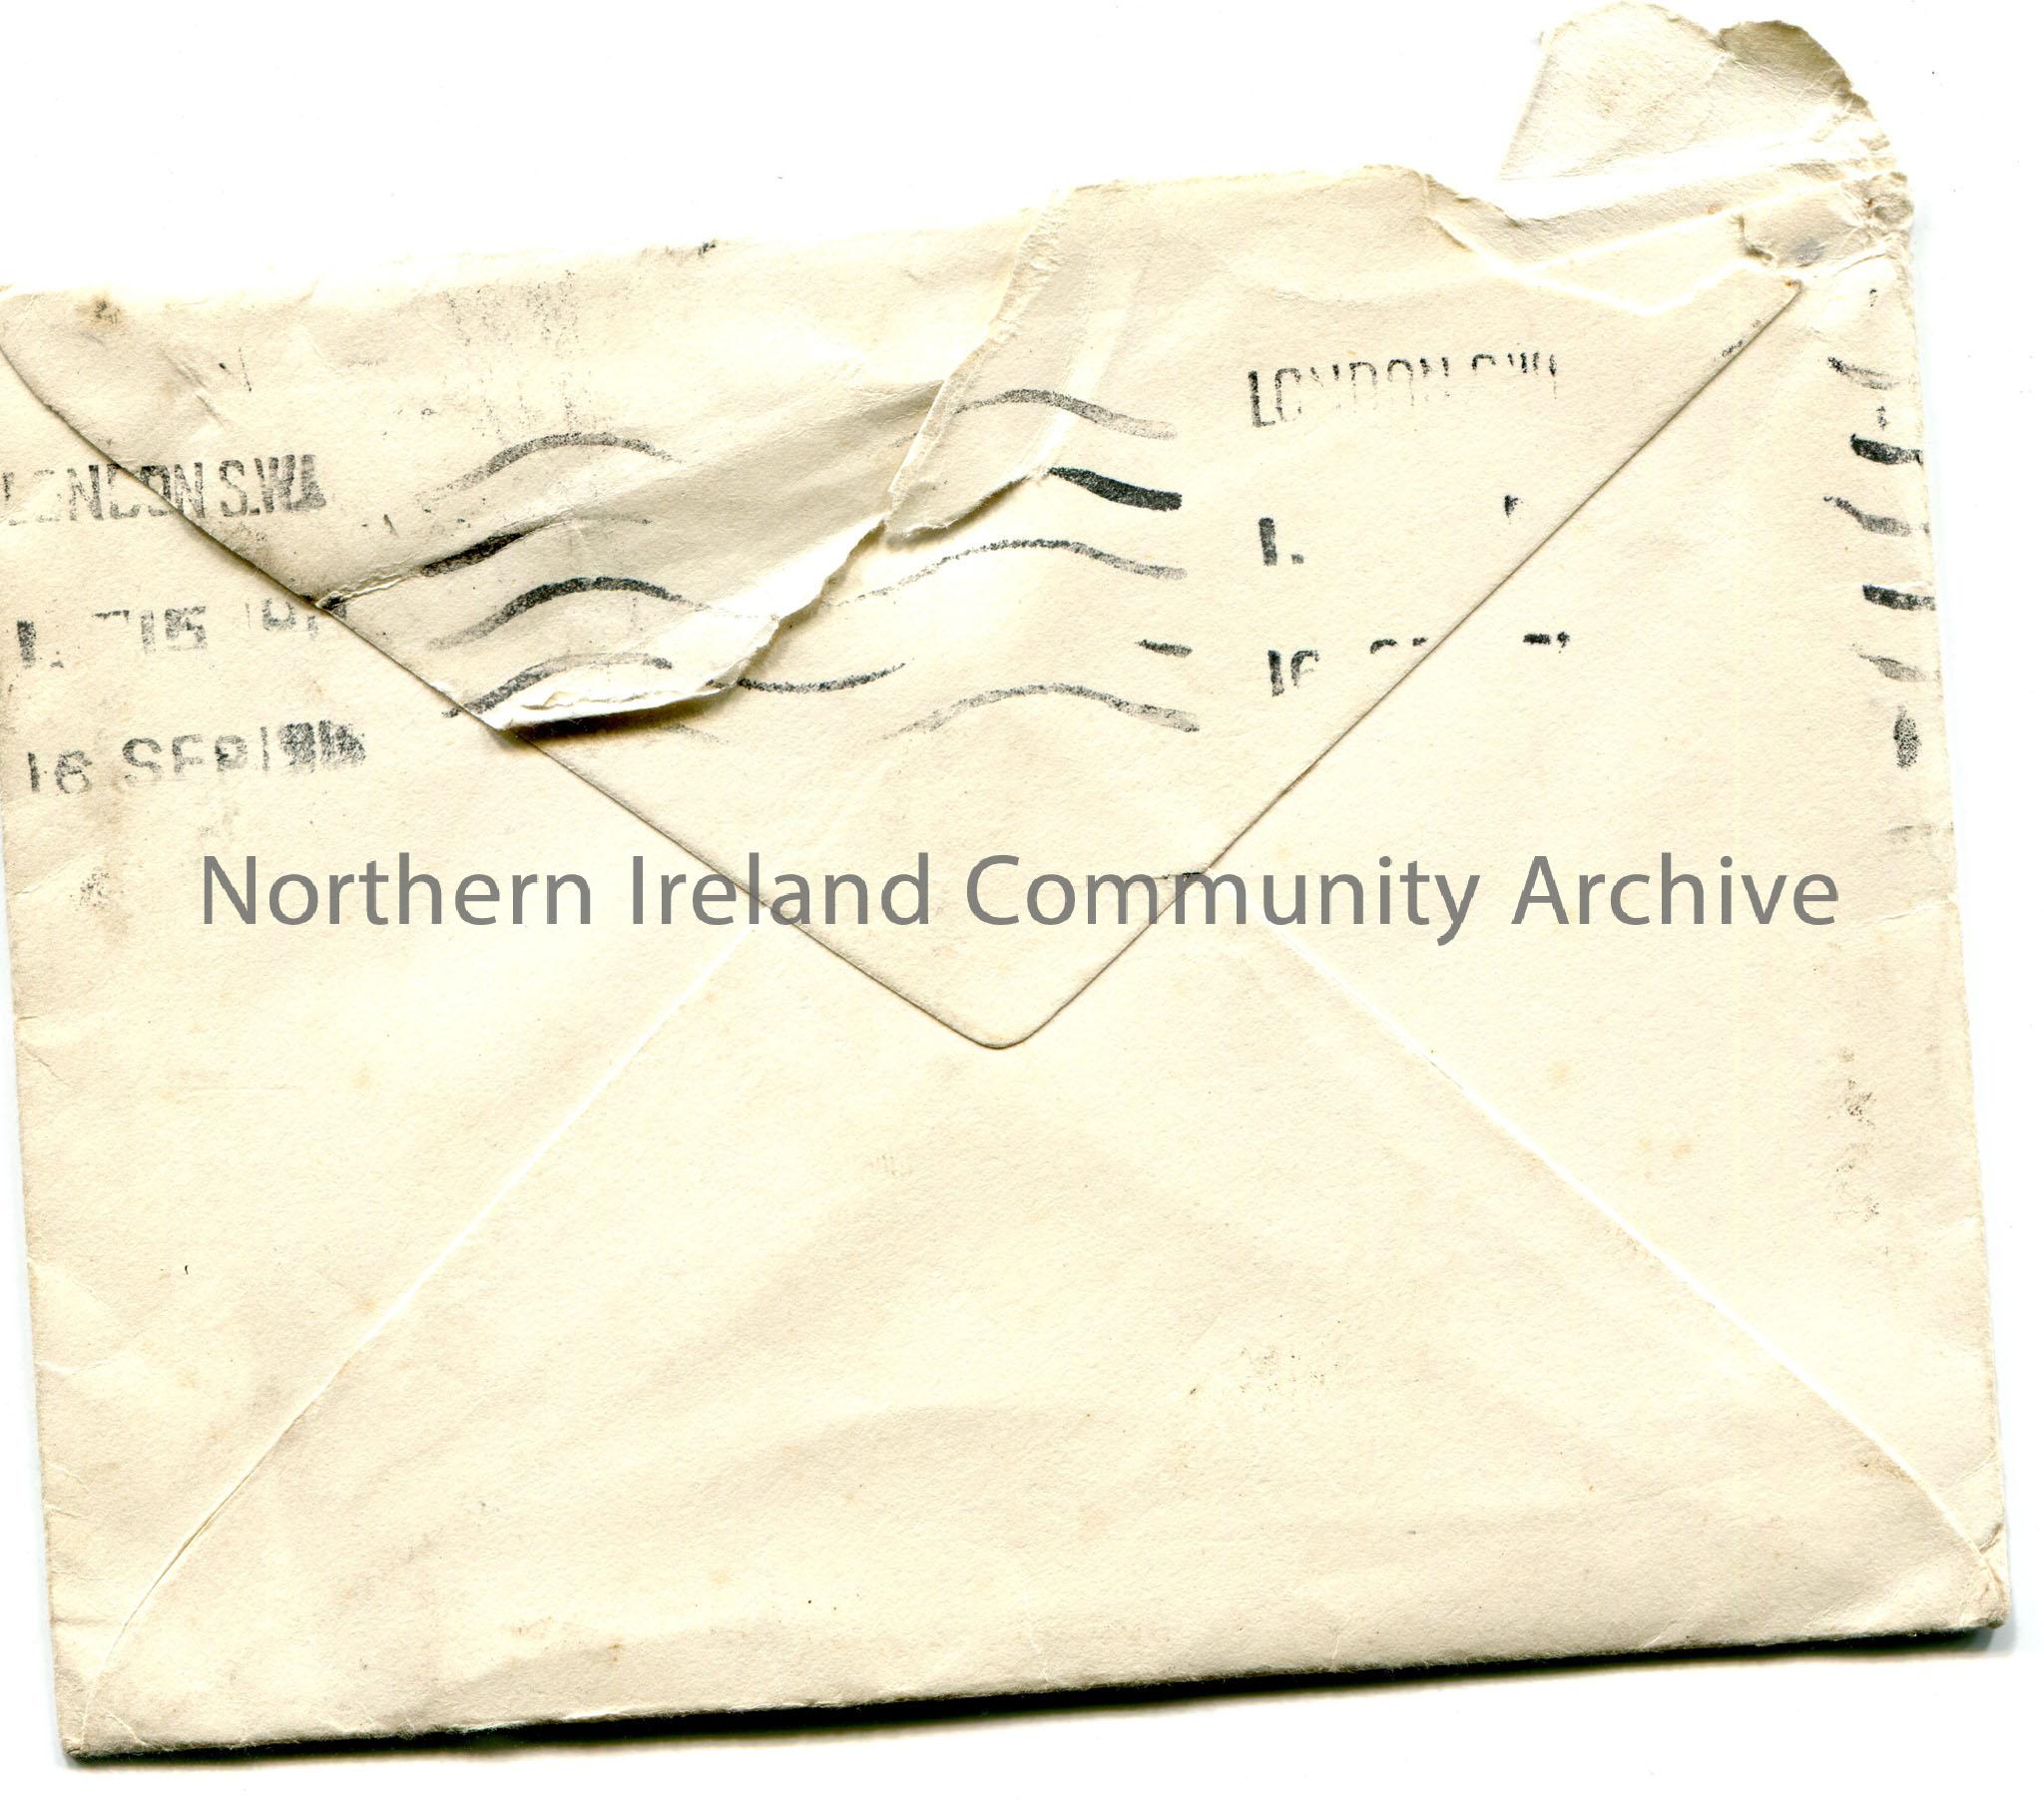 Envelope, handwritten addressed to Miss E. Hezlet, Lady Golfer’s Club, 3 Whitehall Court, S.W which is scored out. Also addressed as Bovagh, Aghadowey… – img018b